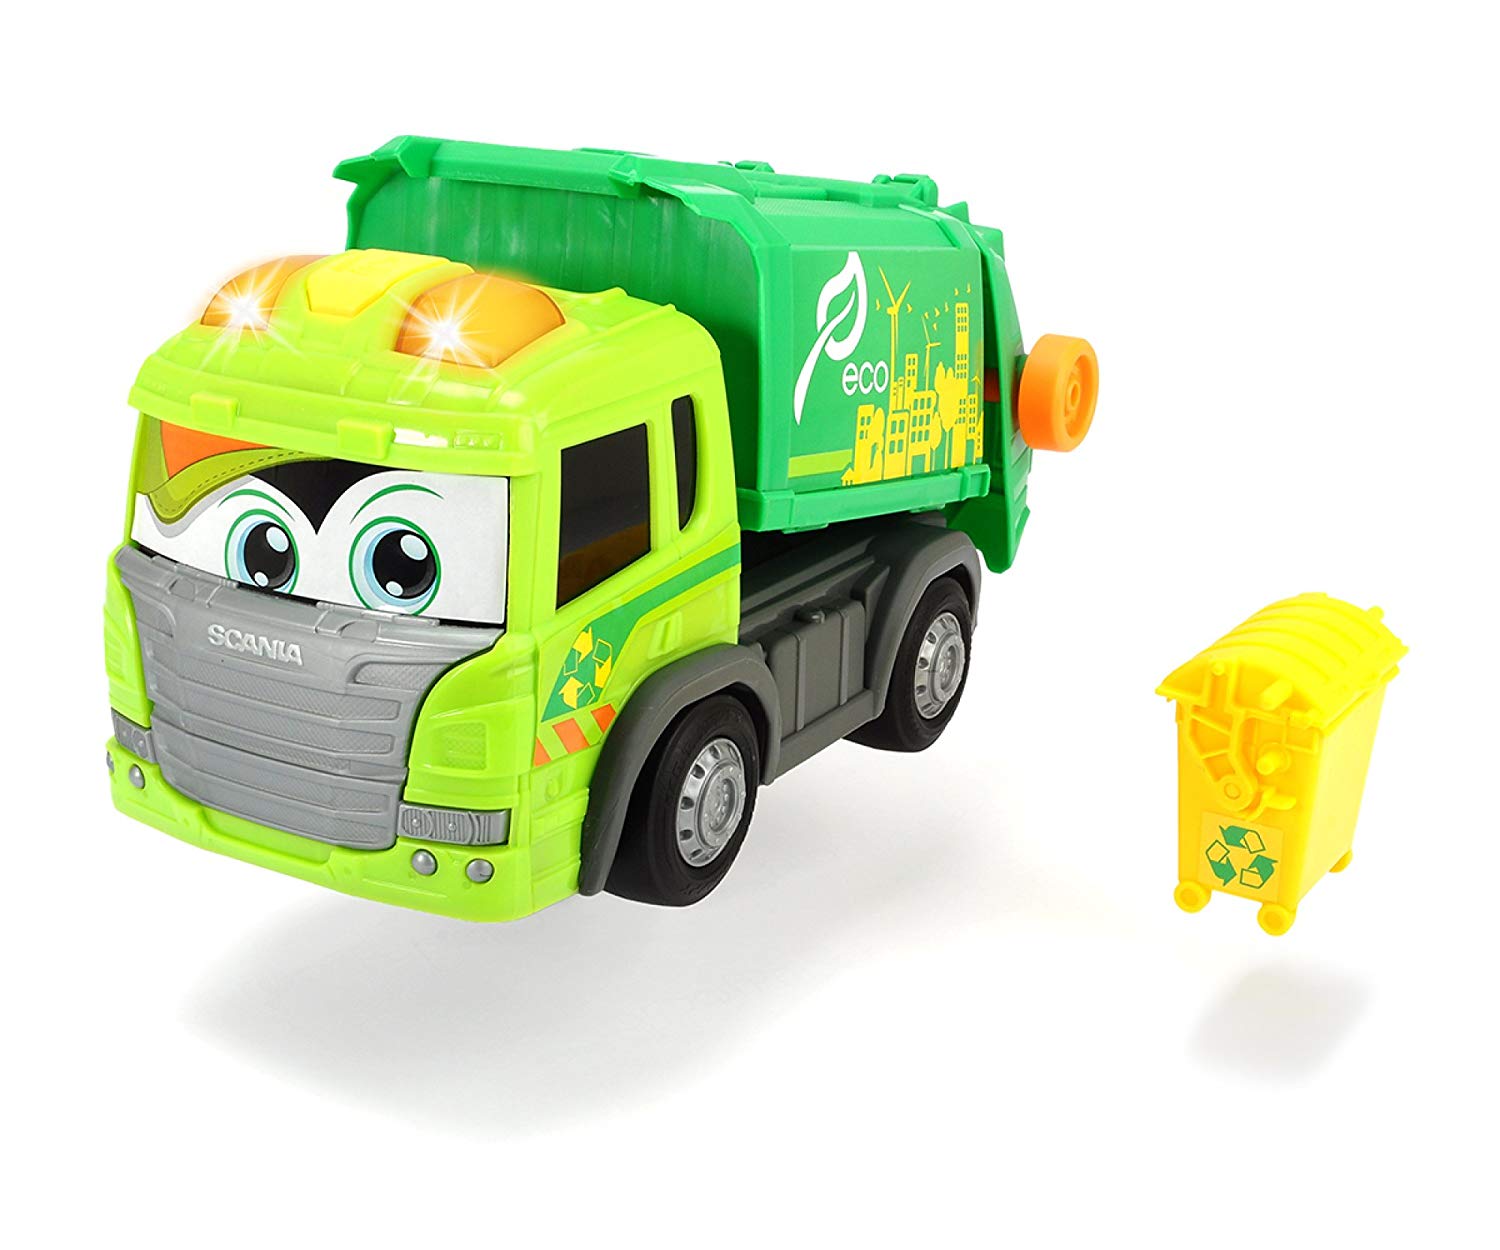 Dickie Toys Happy 203816001 Scania Garbage Truck Vehicle